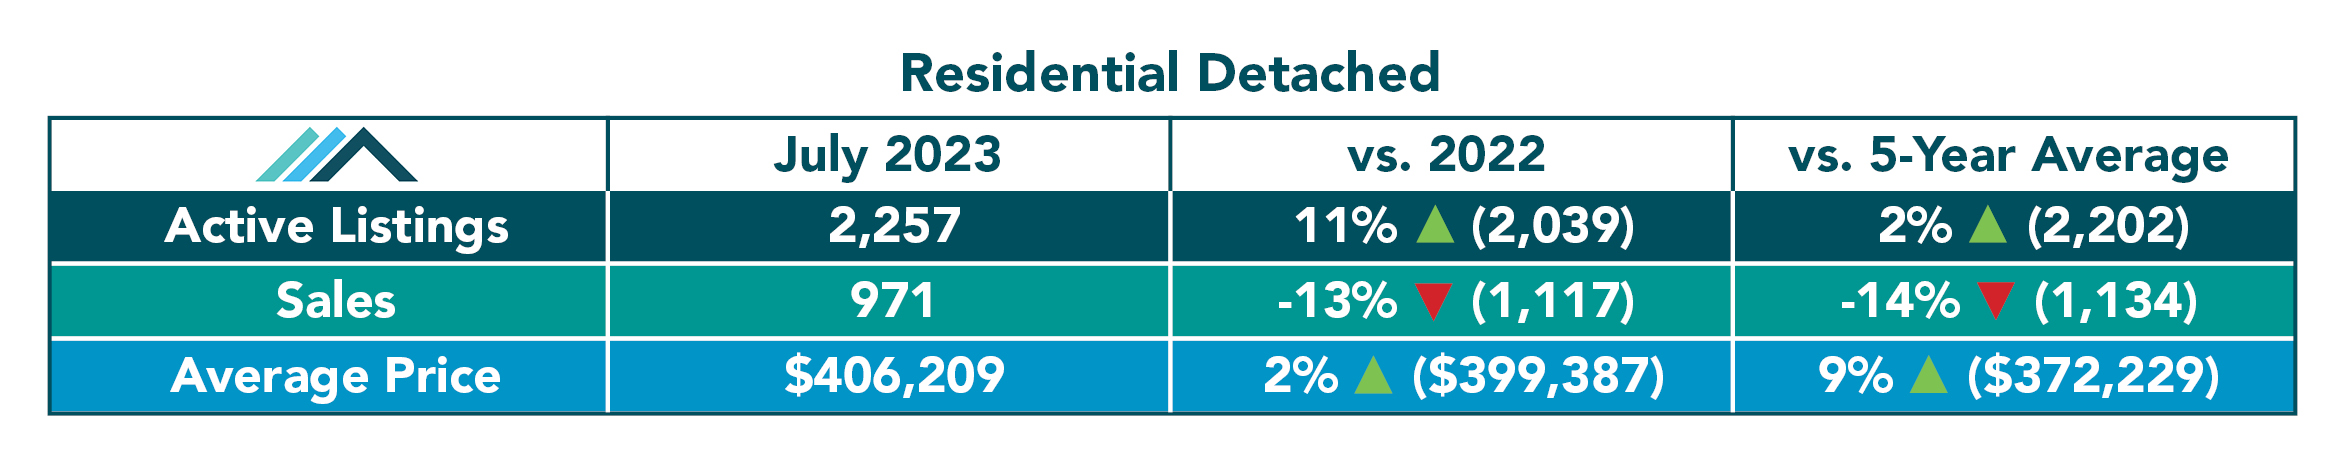 Residential Detached Tables July 2023